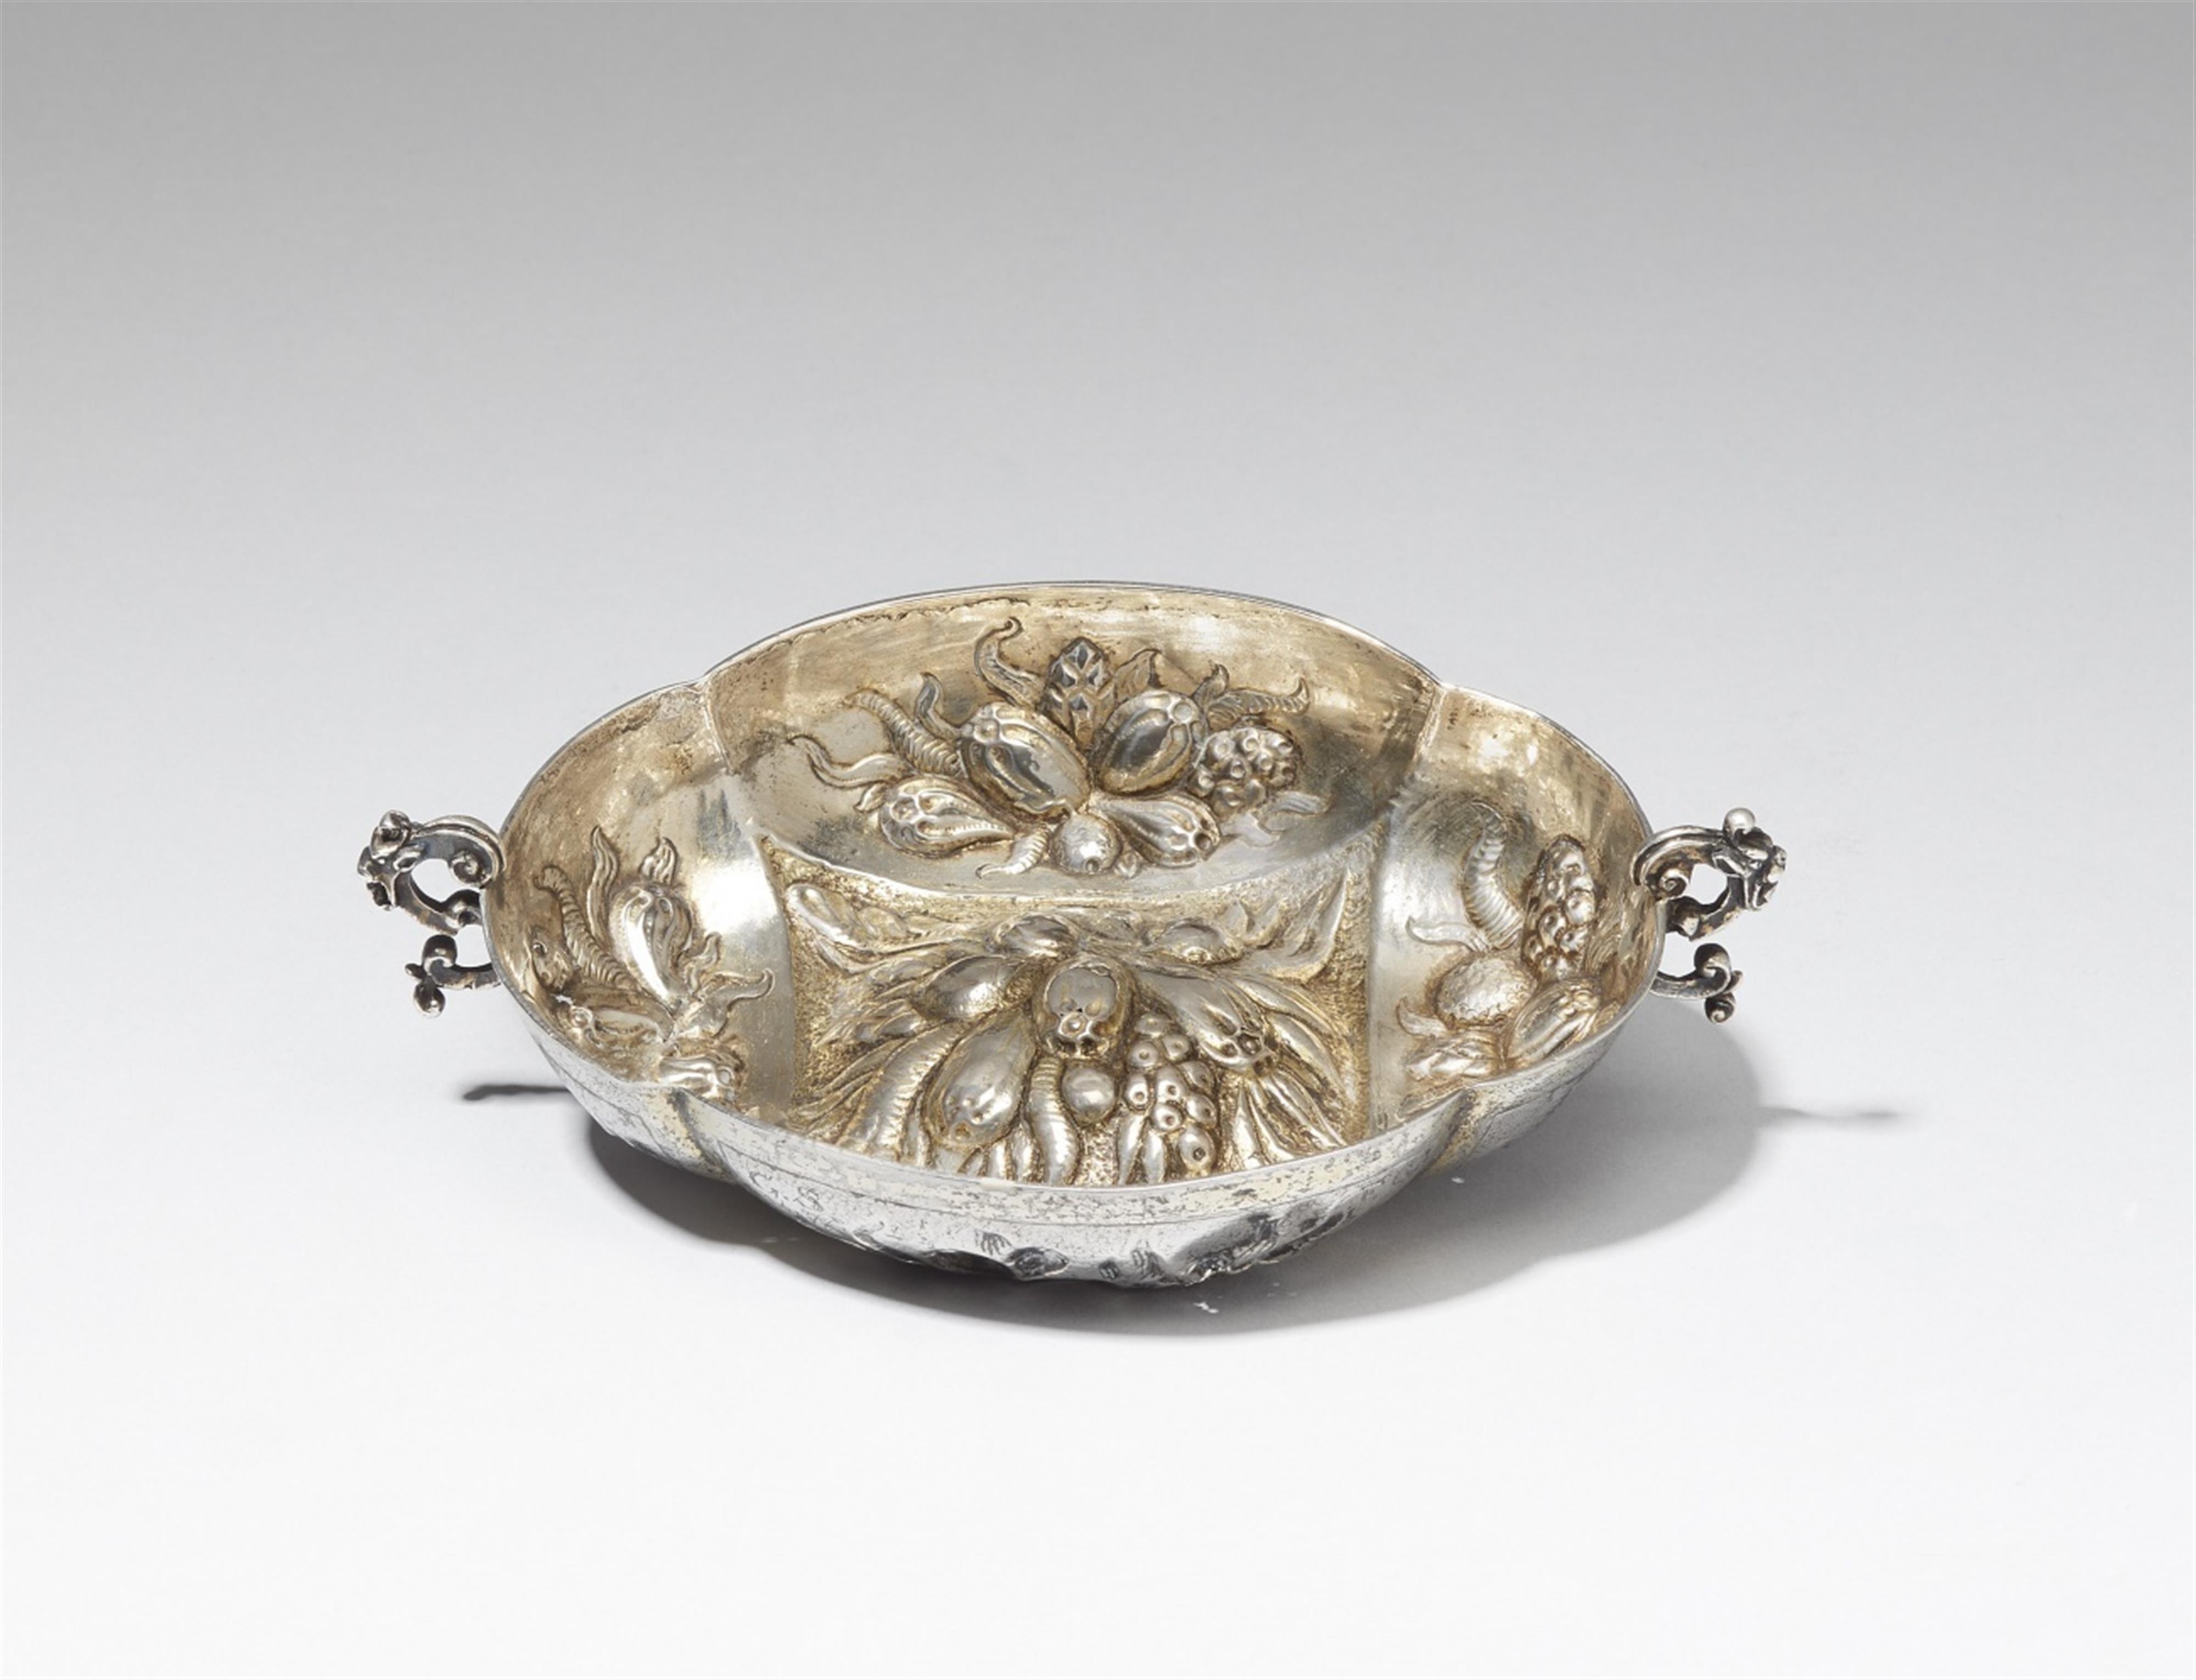 A partially gilt silver brandy bowl. Monogrammed "FG" and "CS", dated 1677. Unmarked, presumably South German, last quarter 17th C. - image-1